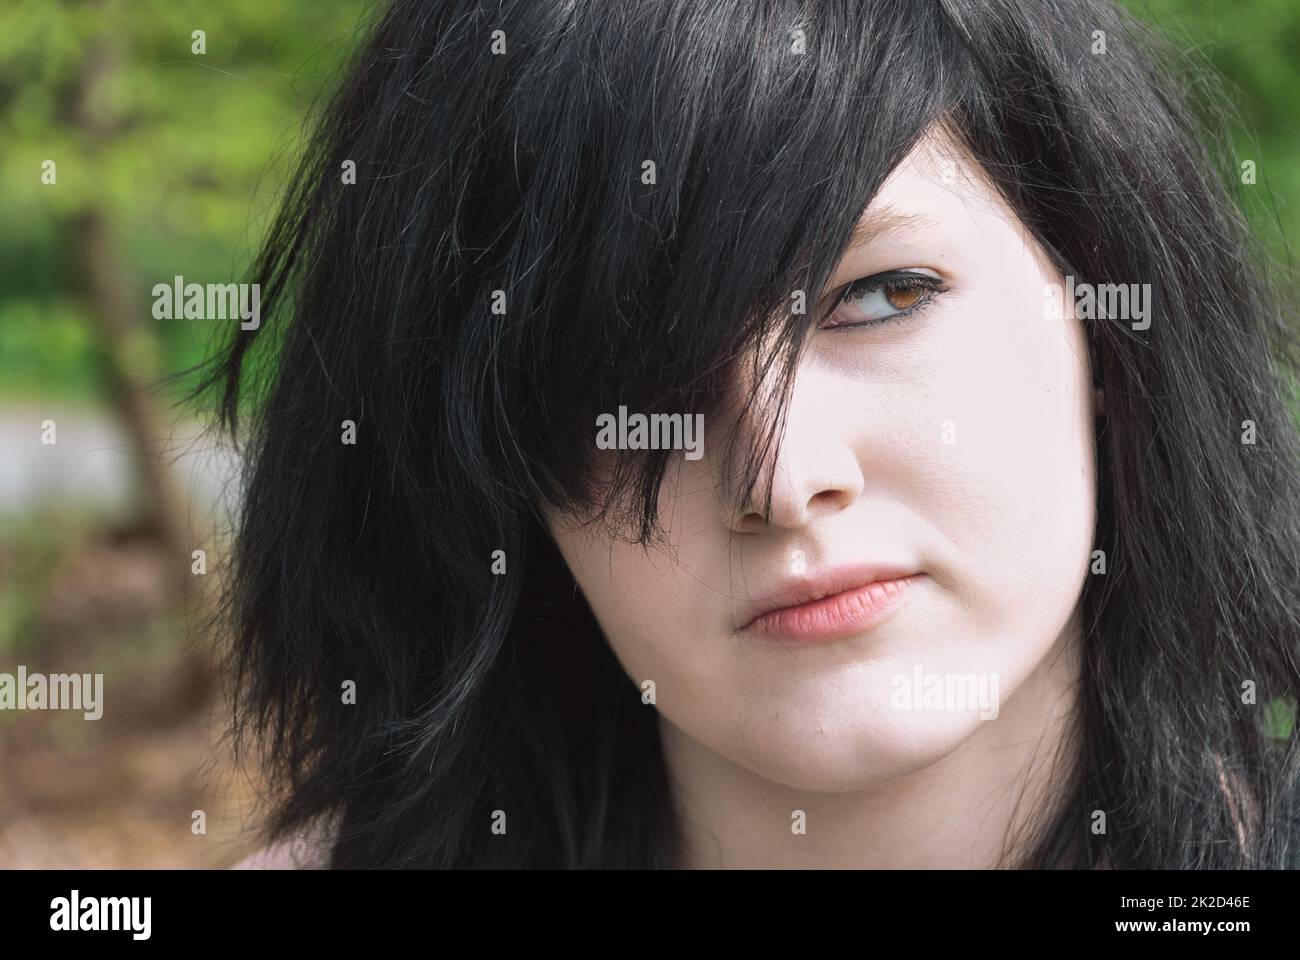 Gothic Emo girl with black hair, close-up Stock Photo